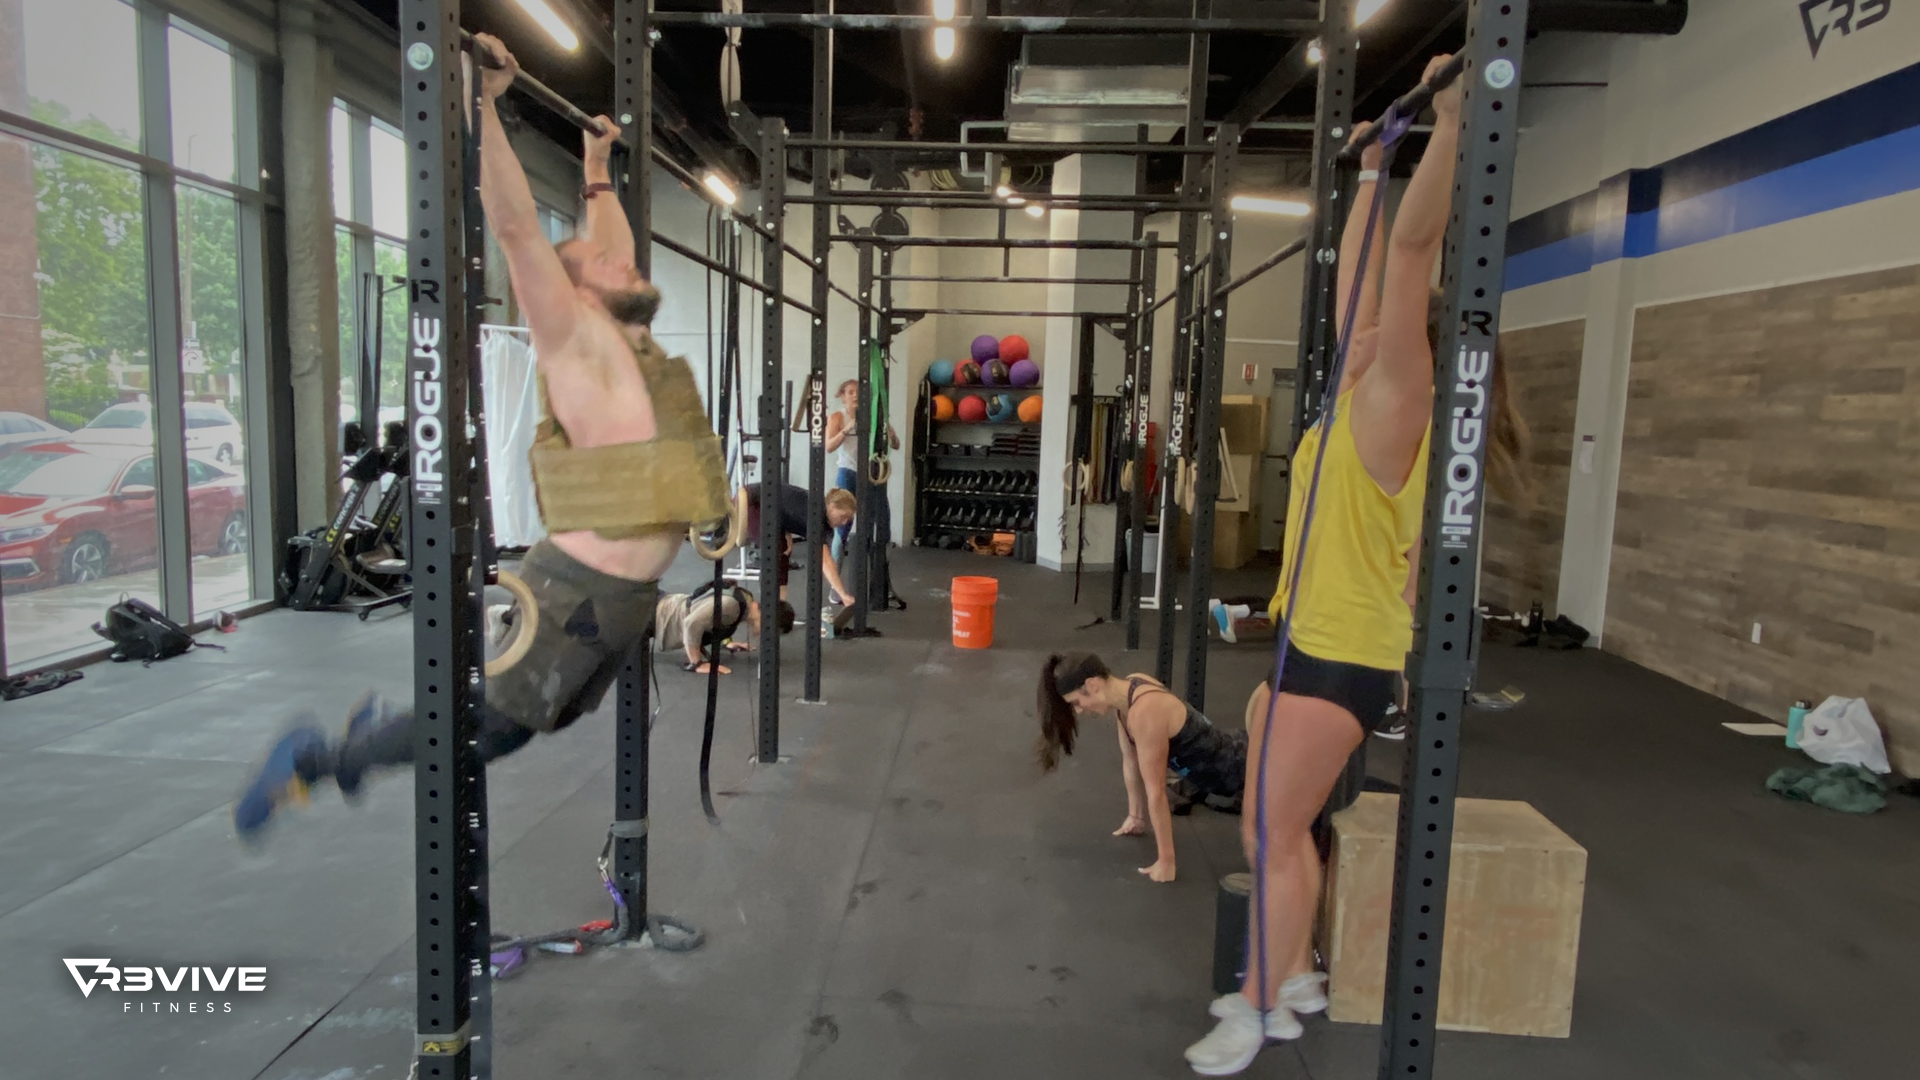 A group performing the Memorial Day / Murph workout